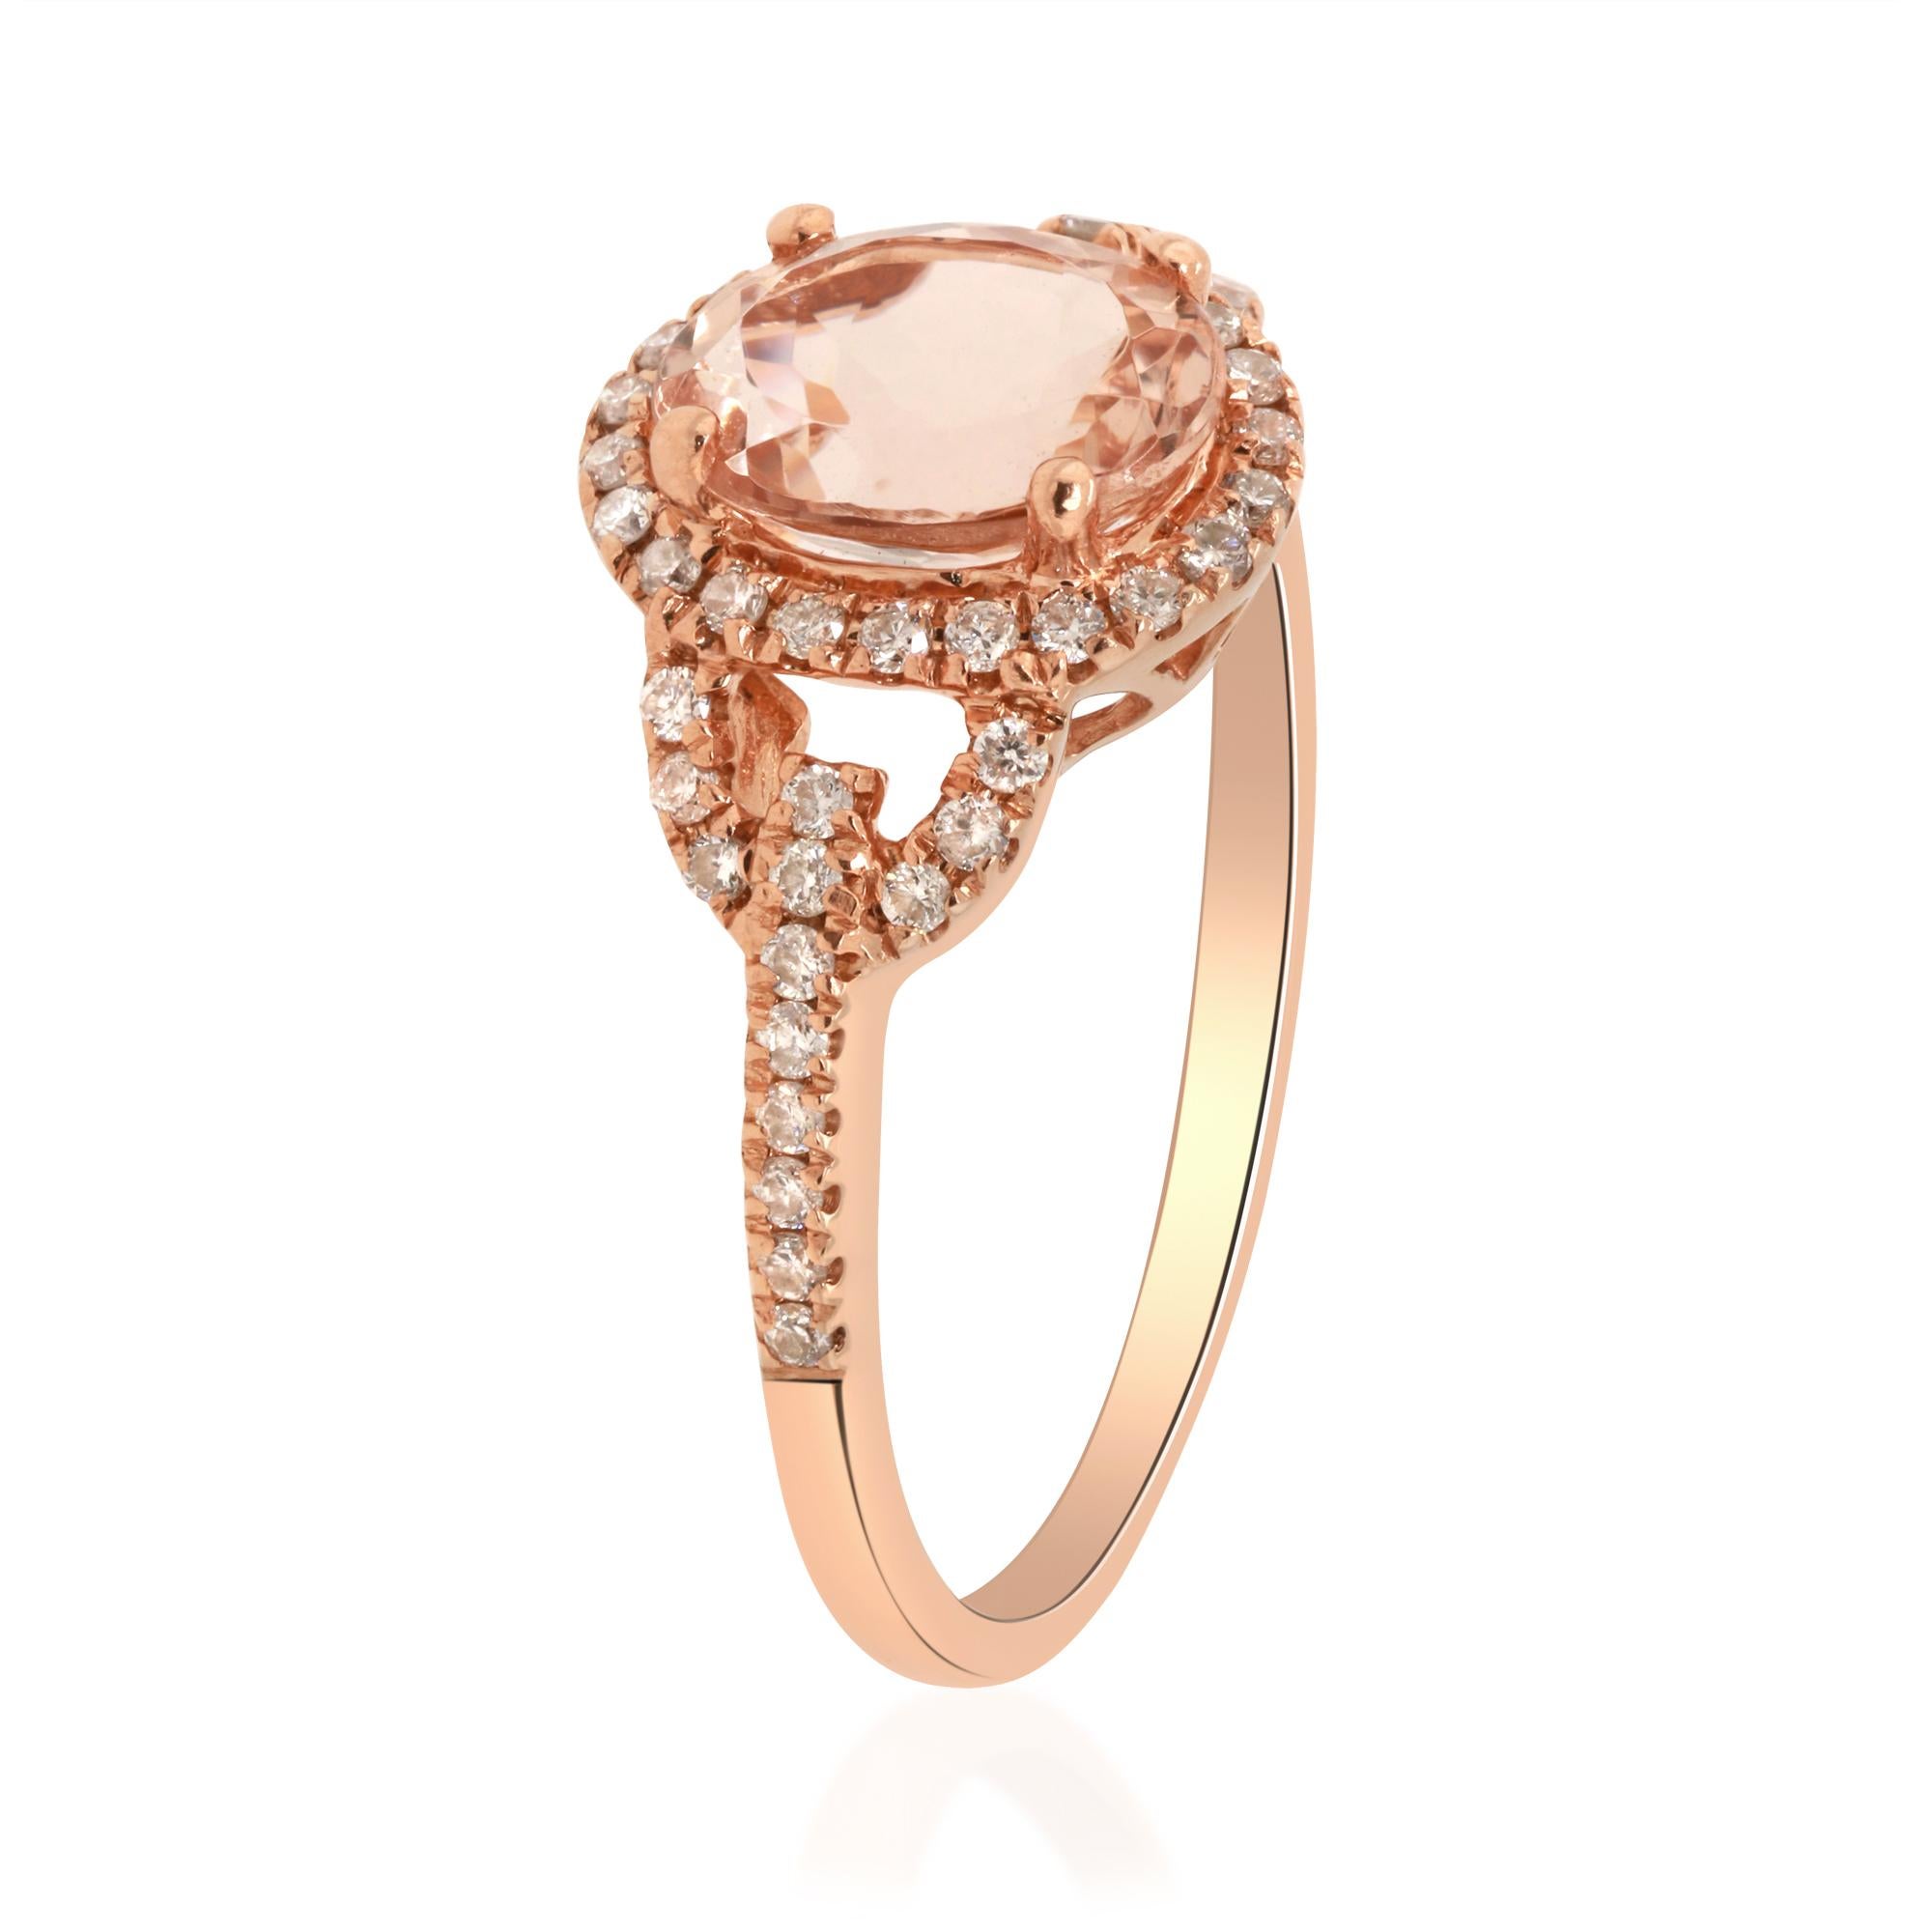 Stunning, timeless and classy eternity Unique ring. Decorate yourself in luxury with this Gin & Grace ring. The 14k Rose Gold jewelry boasts Oval-Cut Prong Setting Genuine Morganite (1pcs) 1.16 Carat and Round-Cut Prong Setting Diamond (50 pcs) 0.27